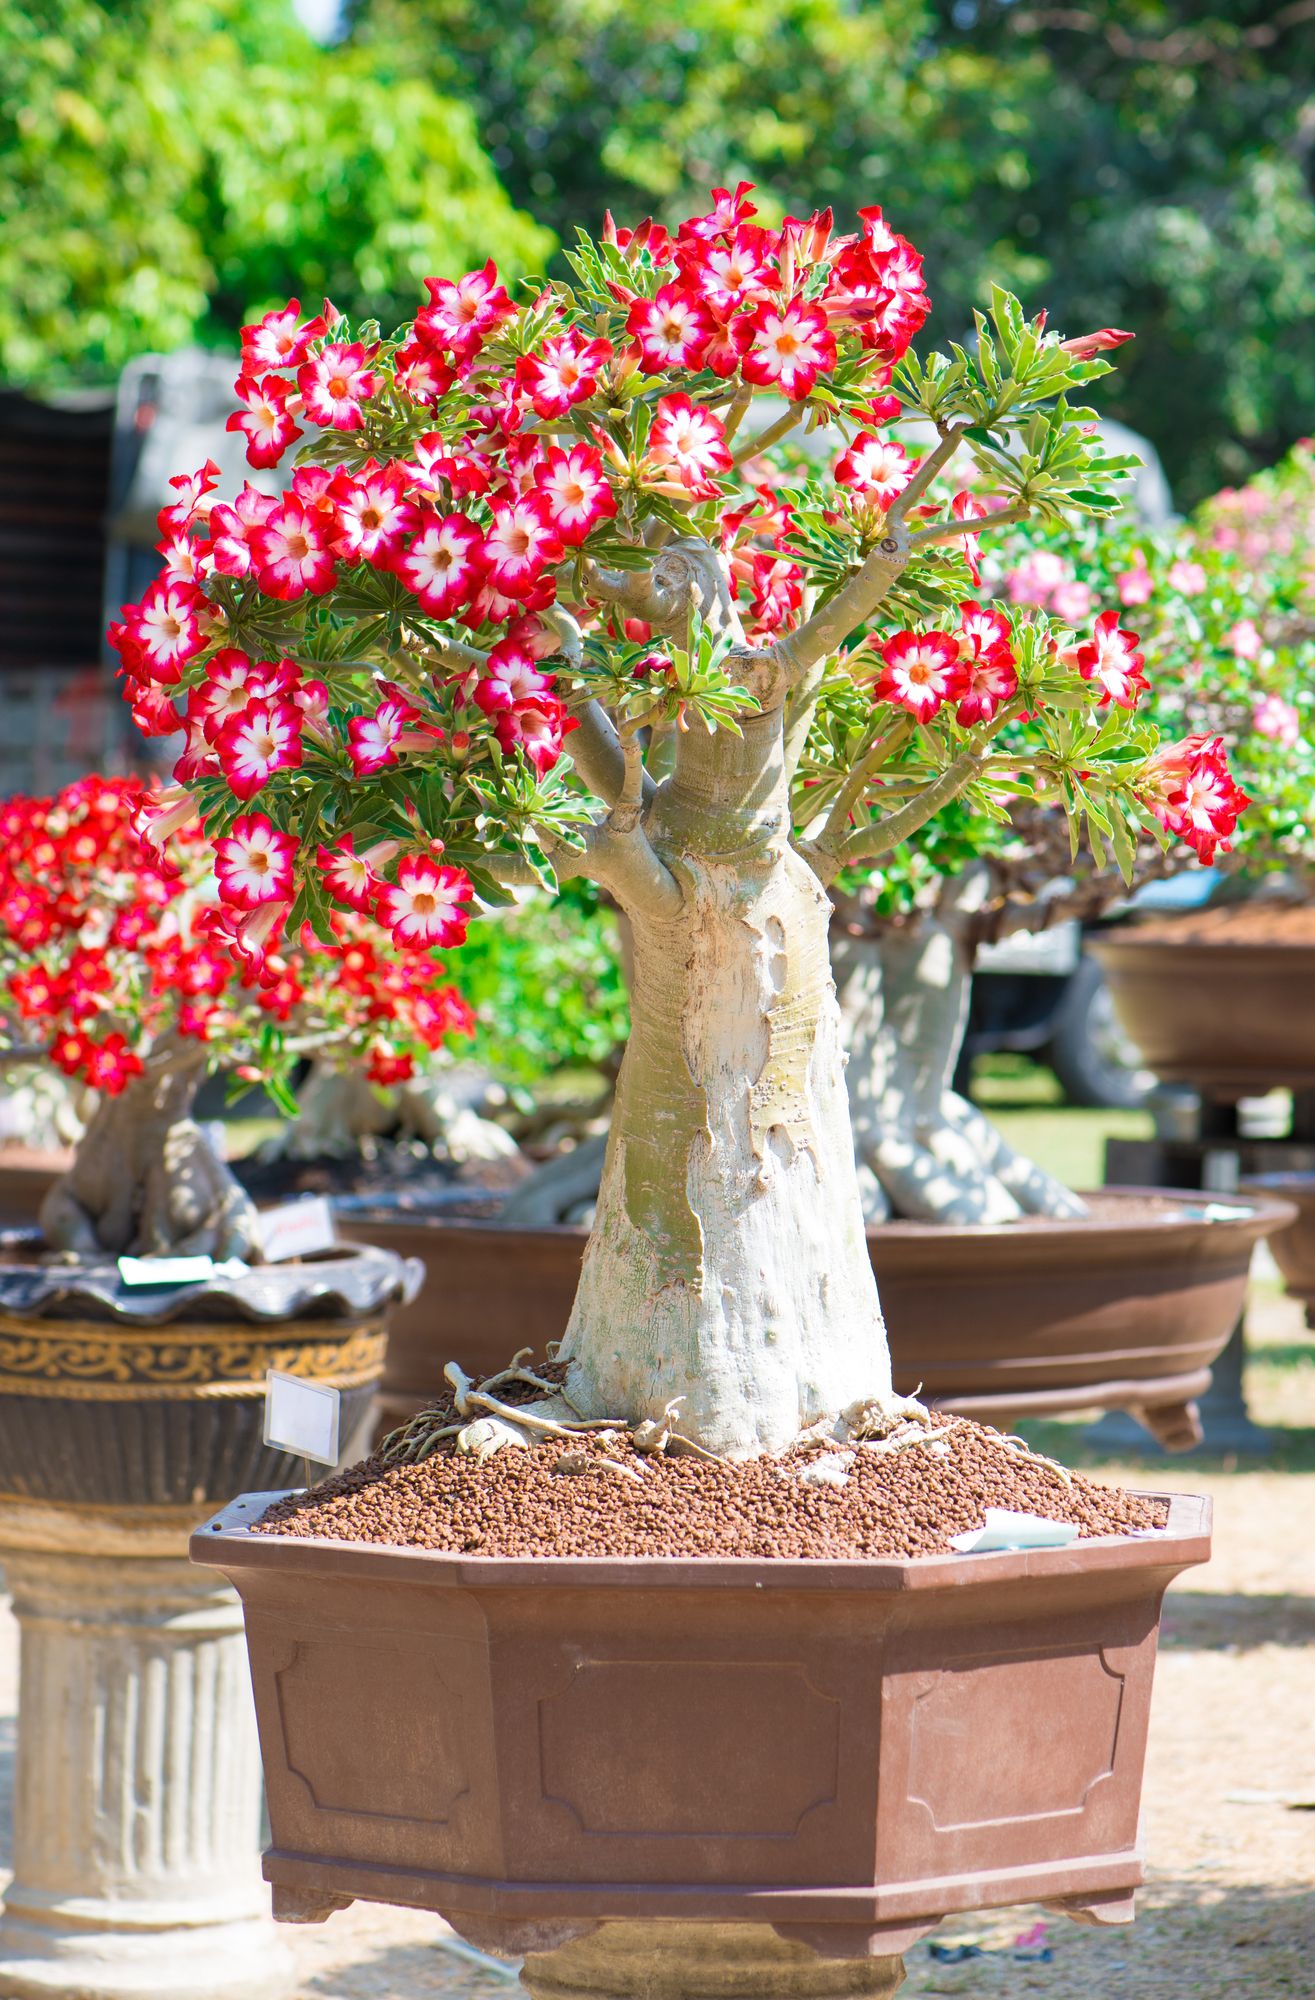 Outdoor planted bonsai tree with flowers colored with red on the edge of every petal and white from the center